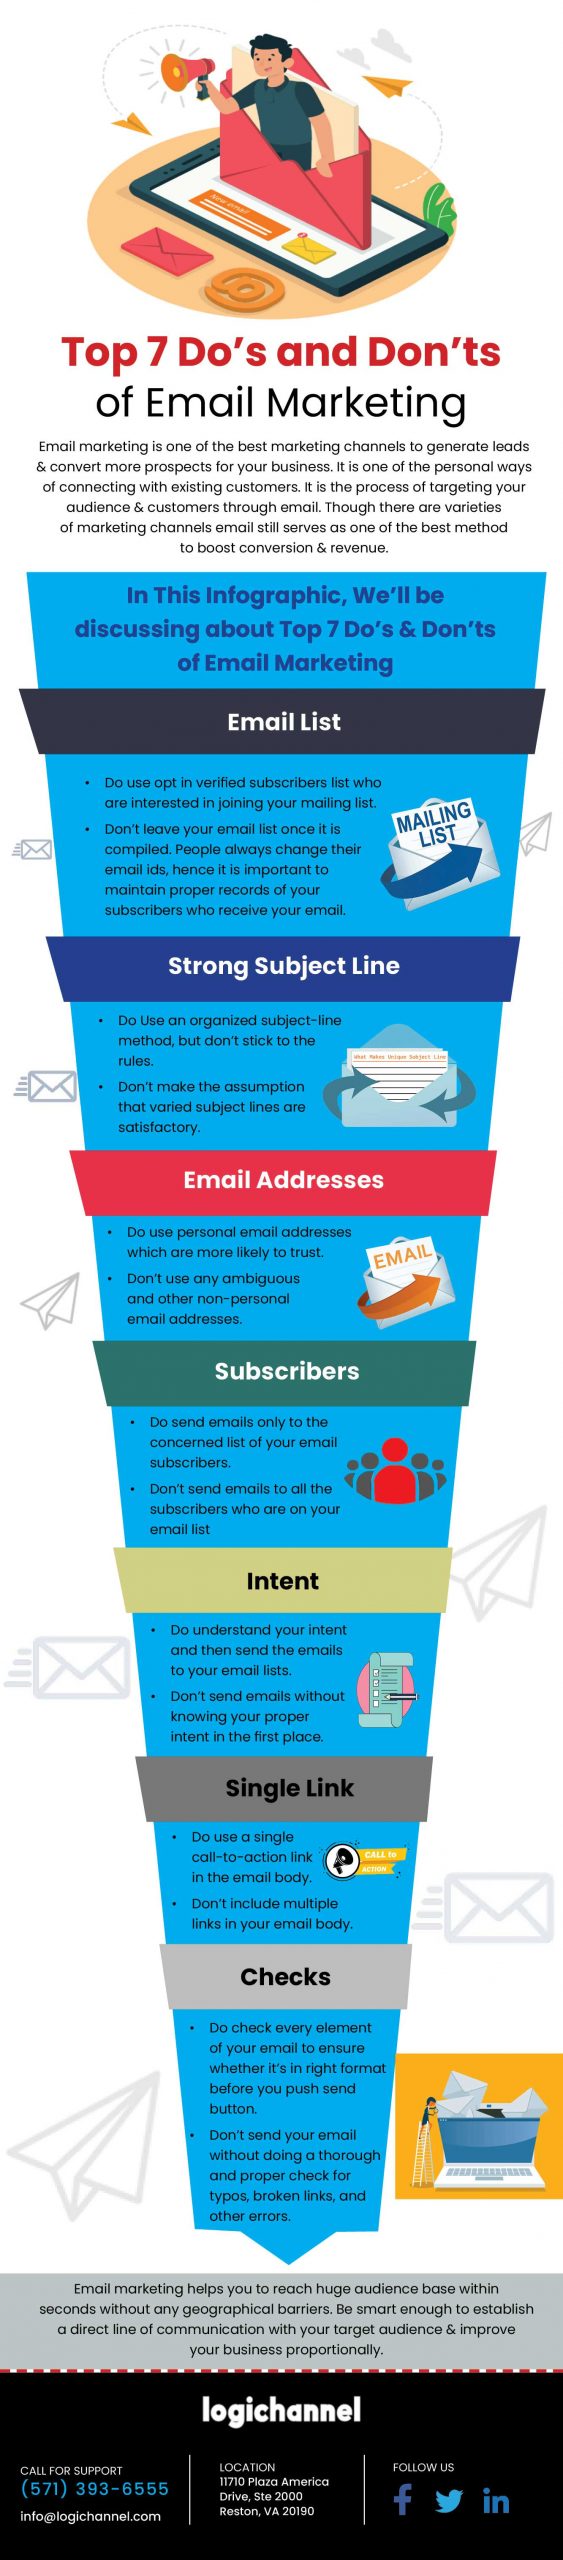 Top 7 Dos and Donts Of Email Marketing | Jigsawlved 